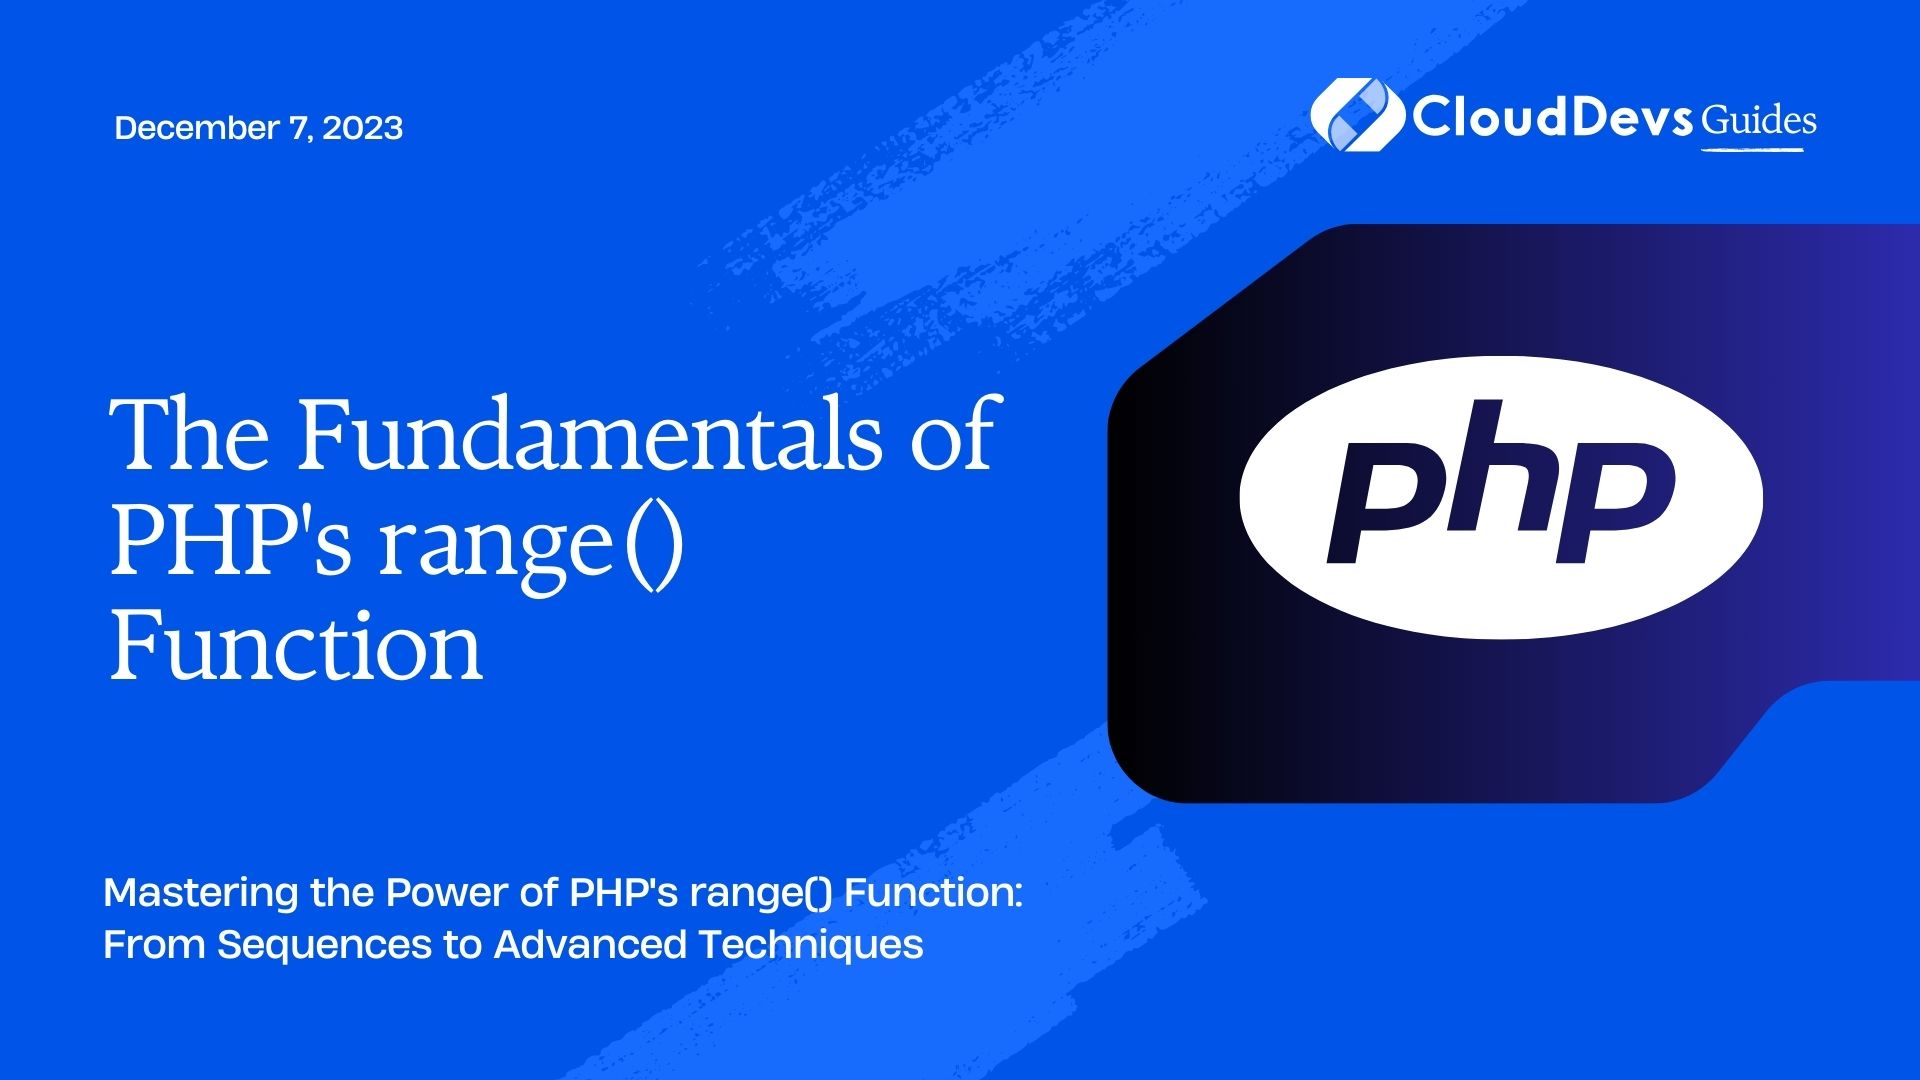 The Fundamentals of PHP's range() Function